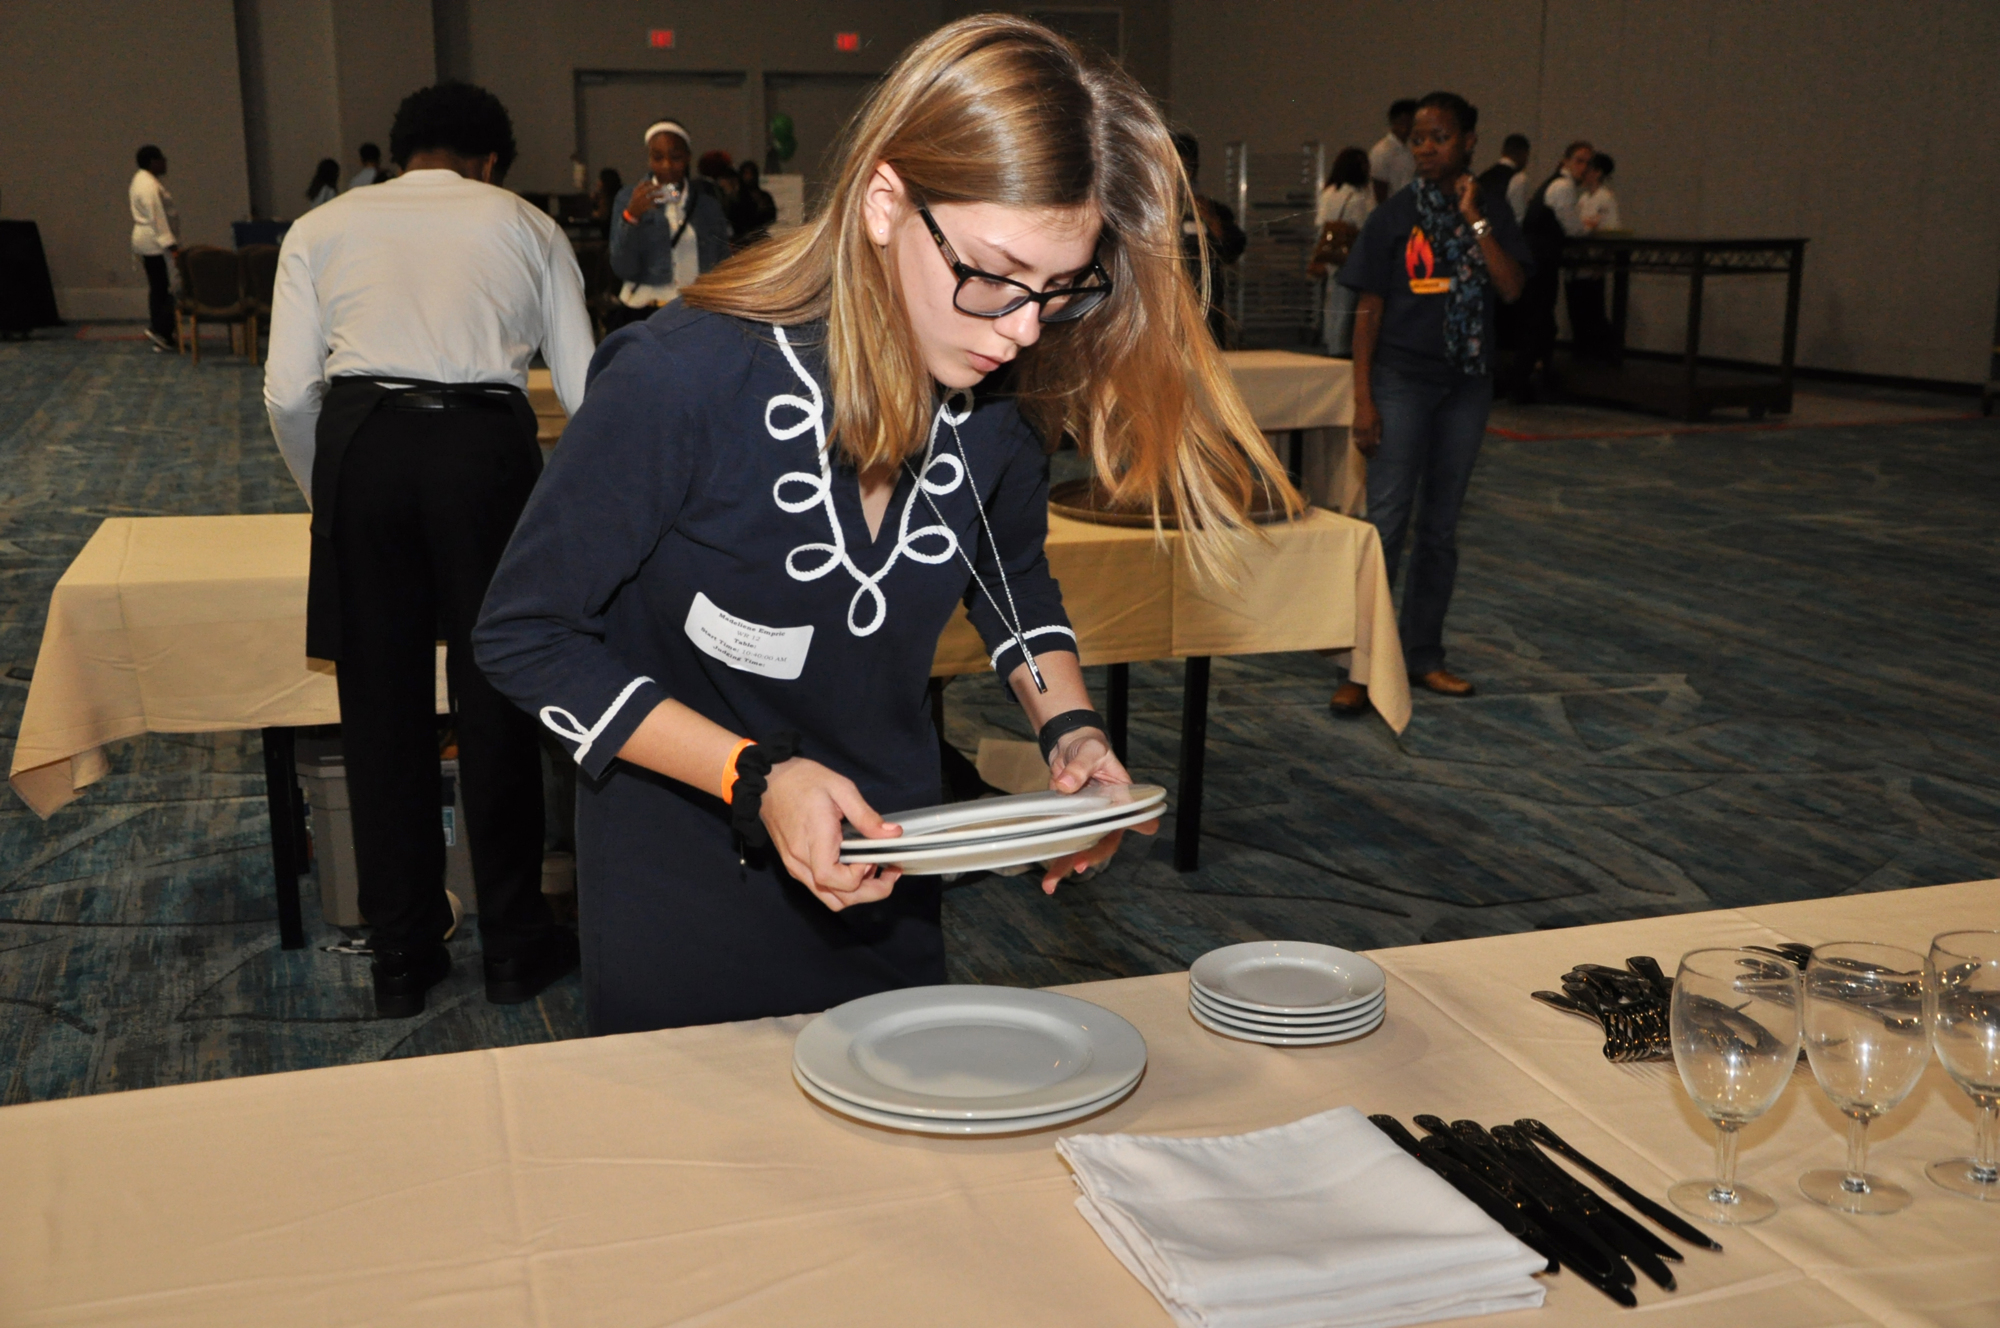 Windermere High School student Madeliene Empric quickly got plates to her team’s table during the waiters’ relay.